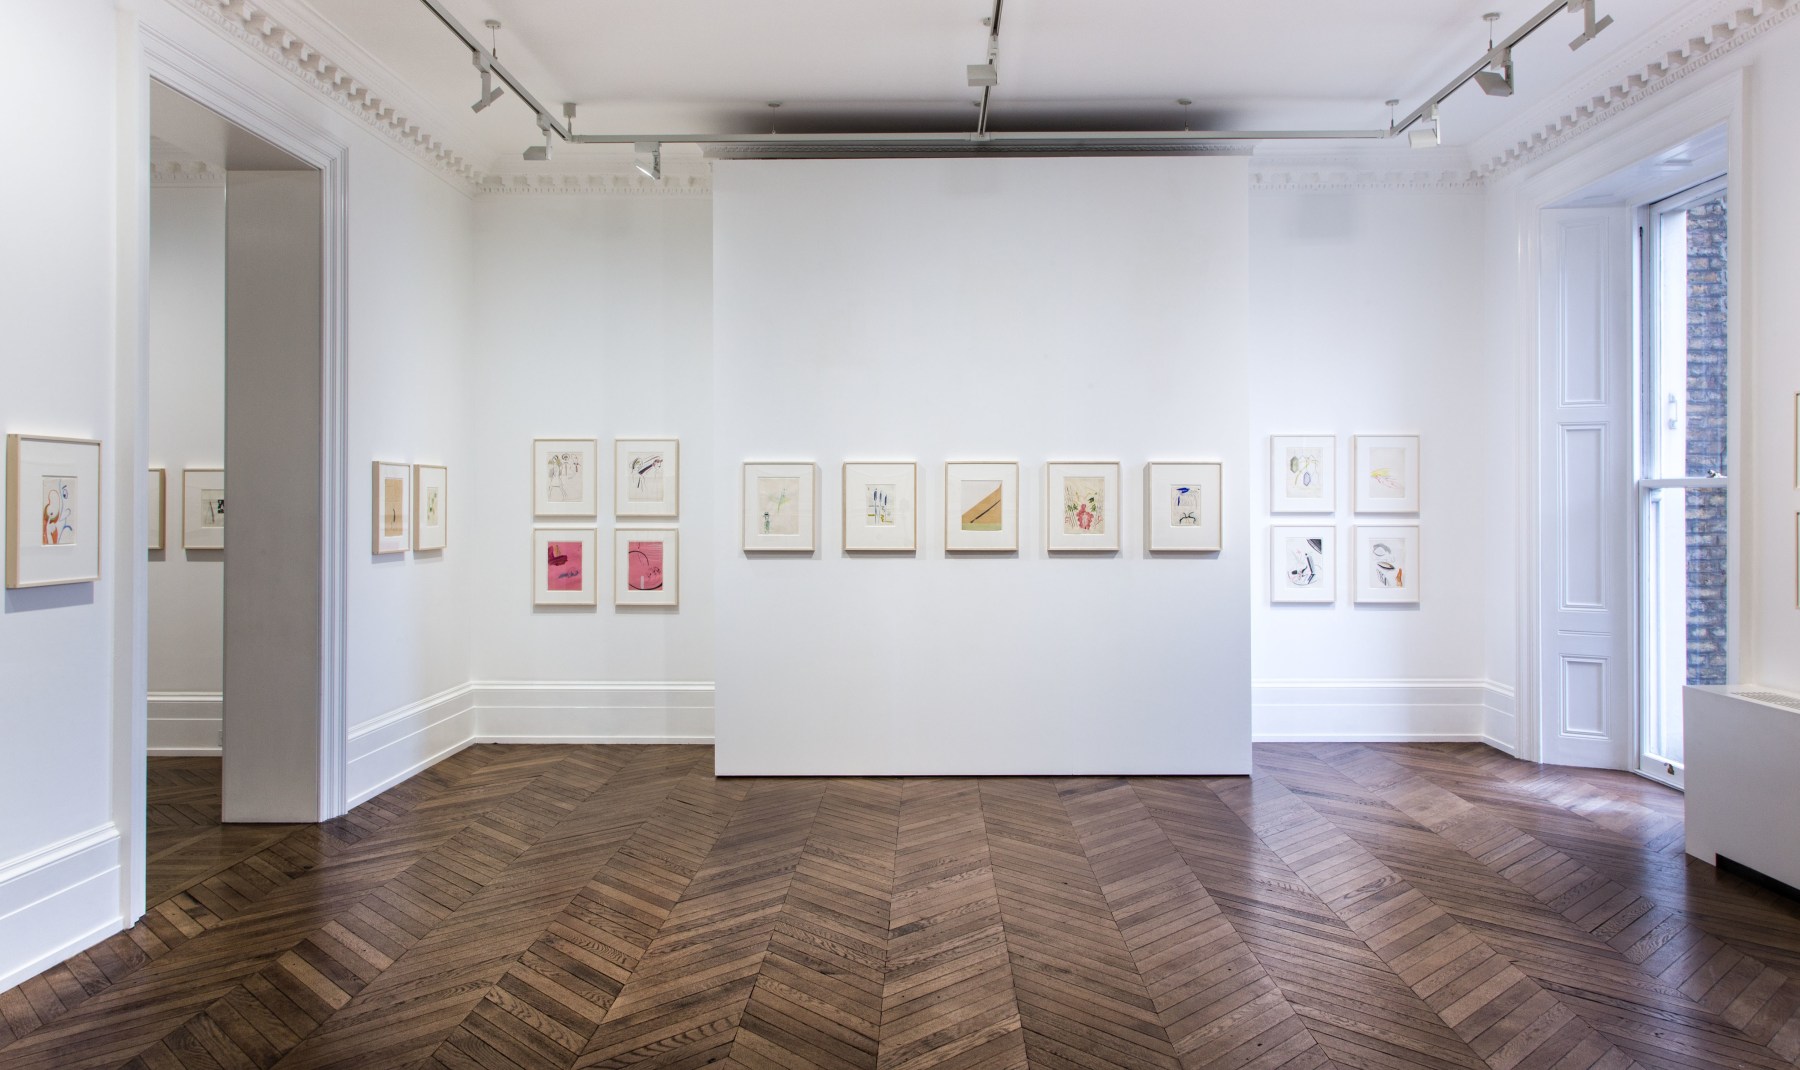 Sigmar Polke, Early Works on Paper, London, 2015, Installation Image 8